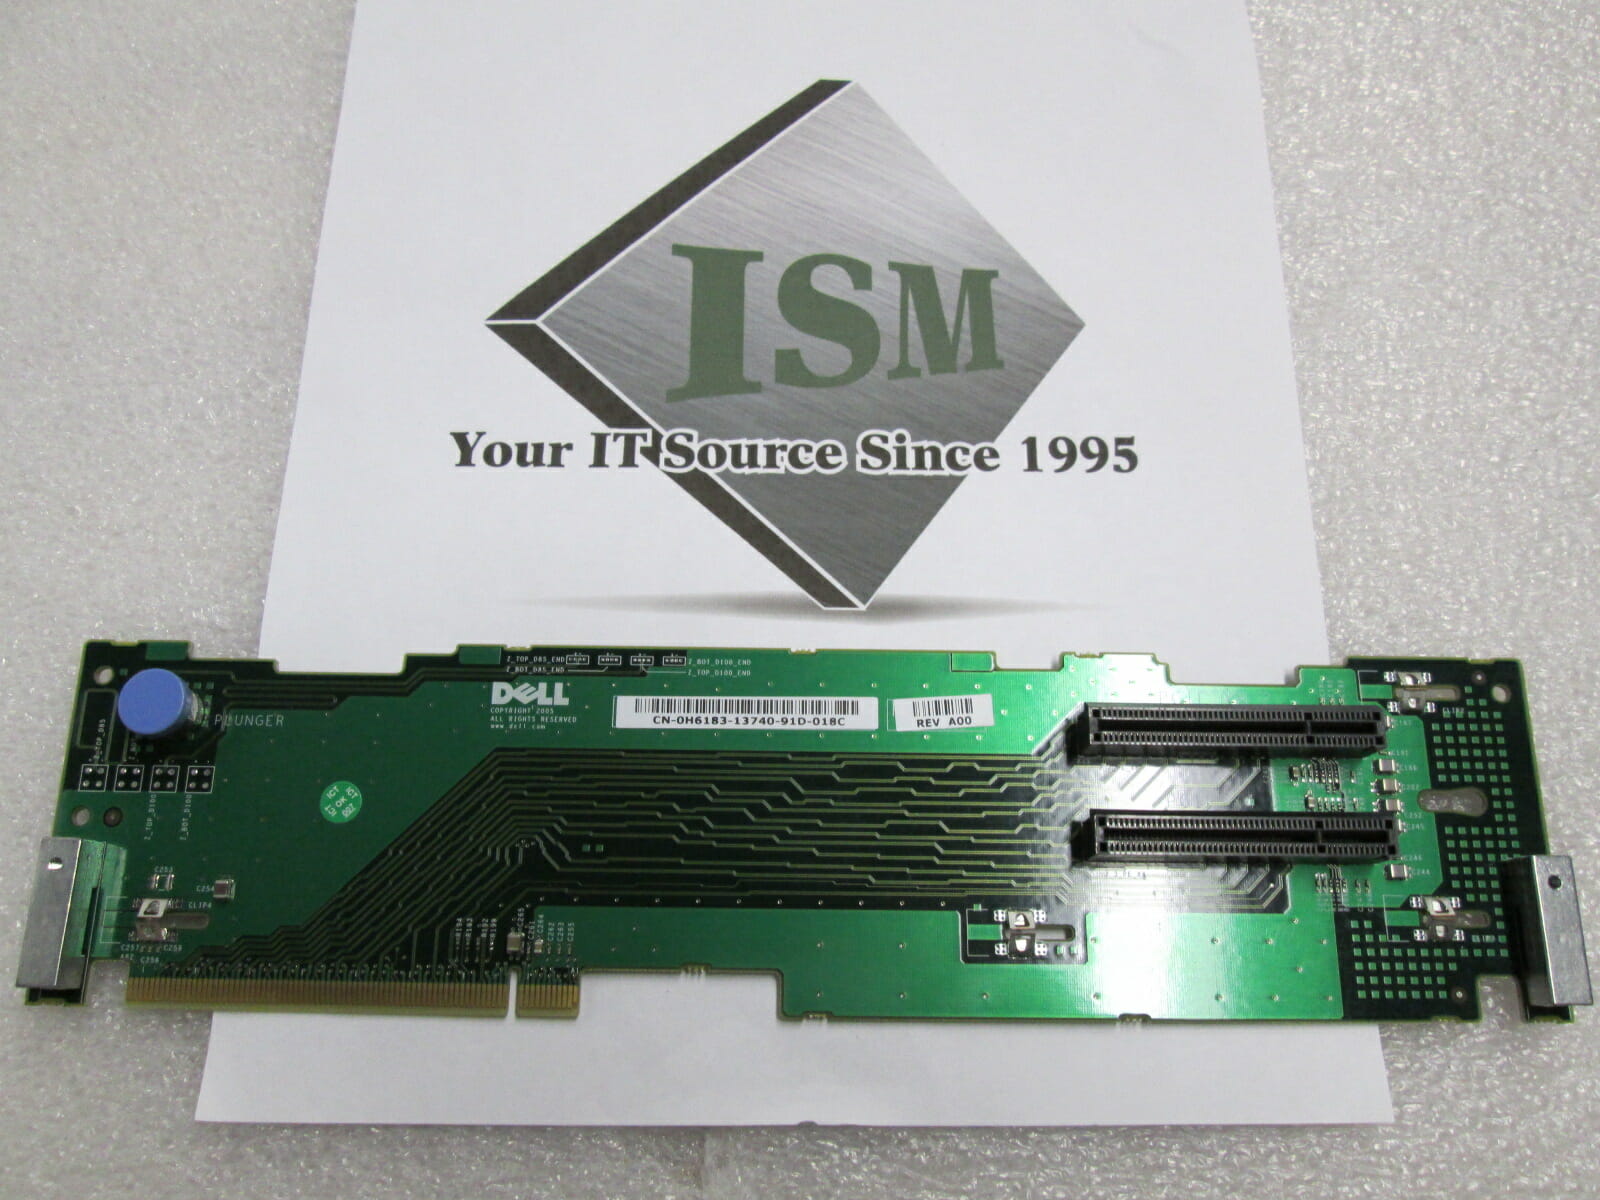 Dell H61 Pci E Riser Card For Pe2950 International Systems Management